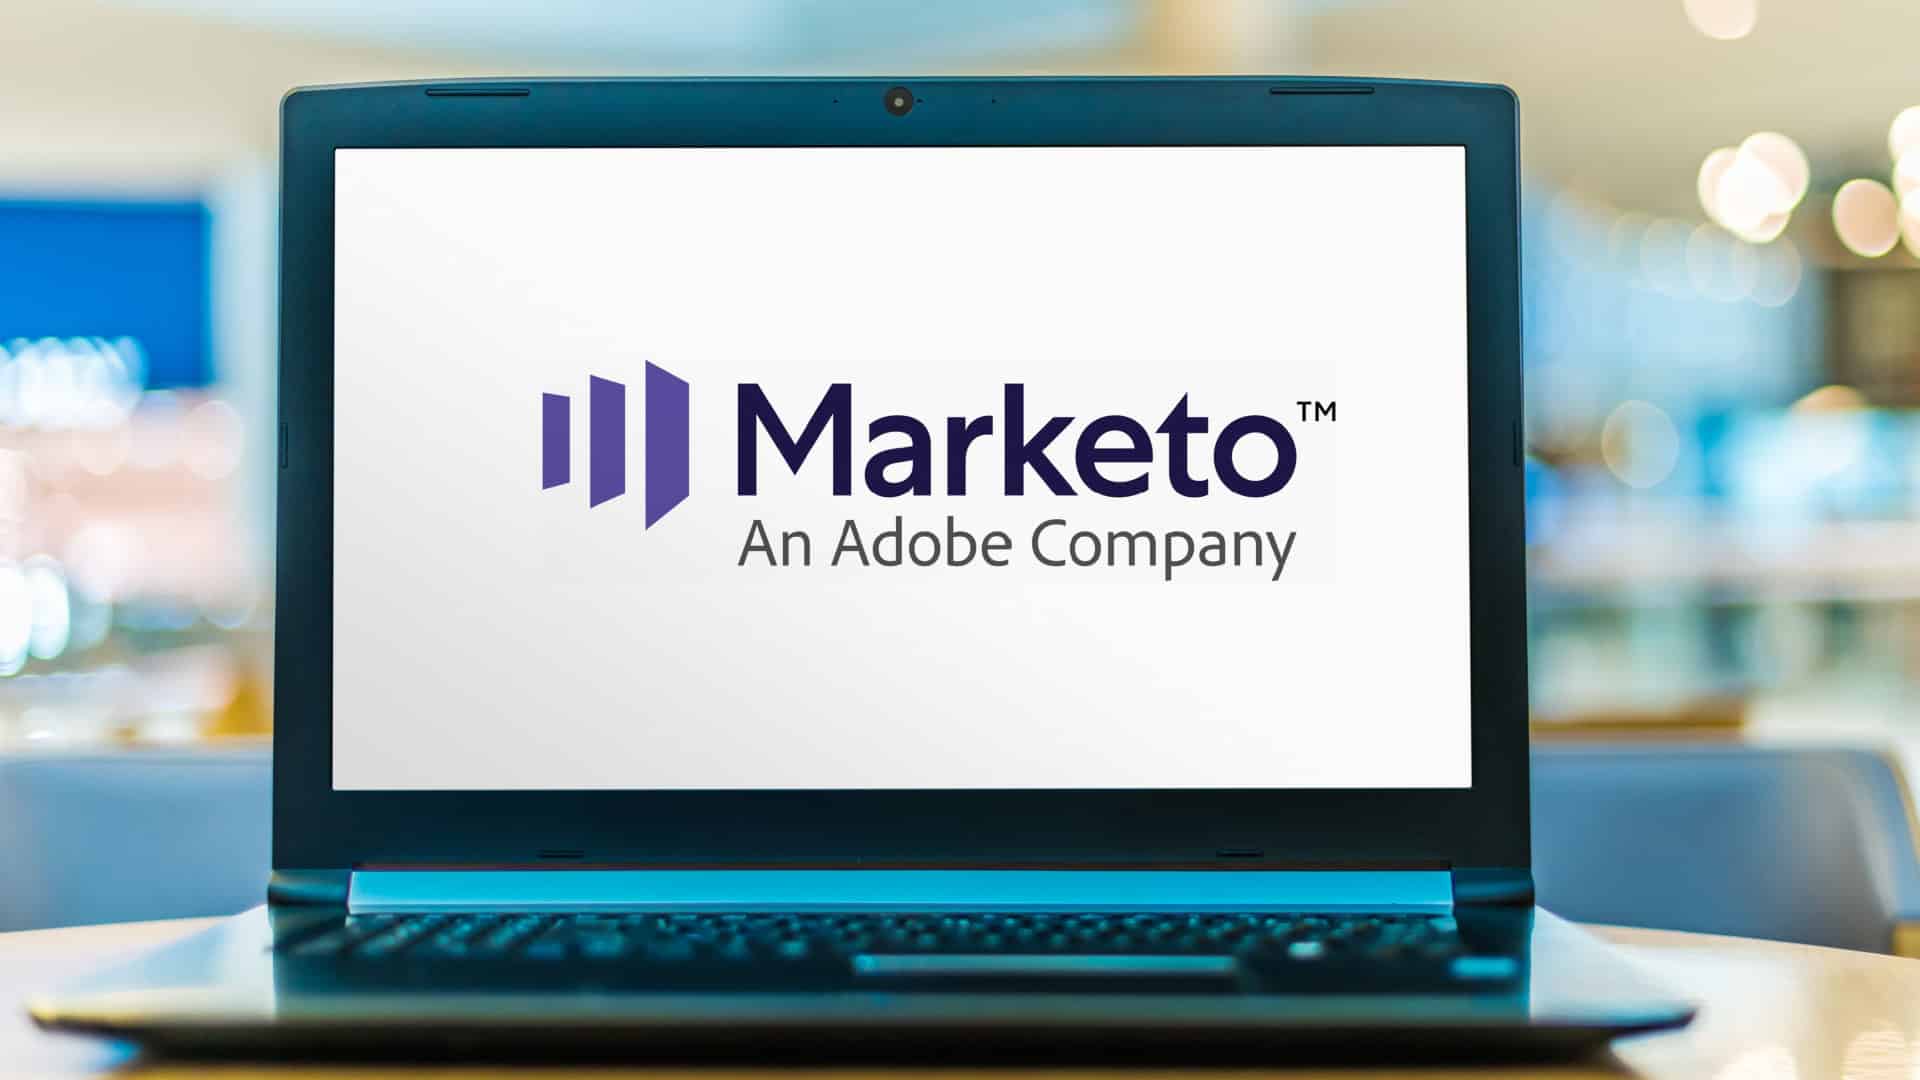 Marketo's August releases: A manager's guide